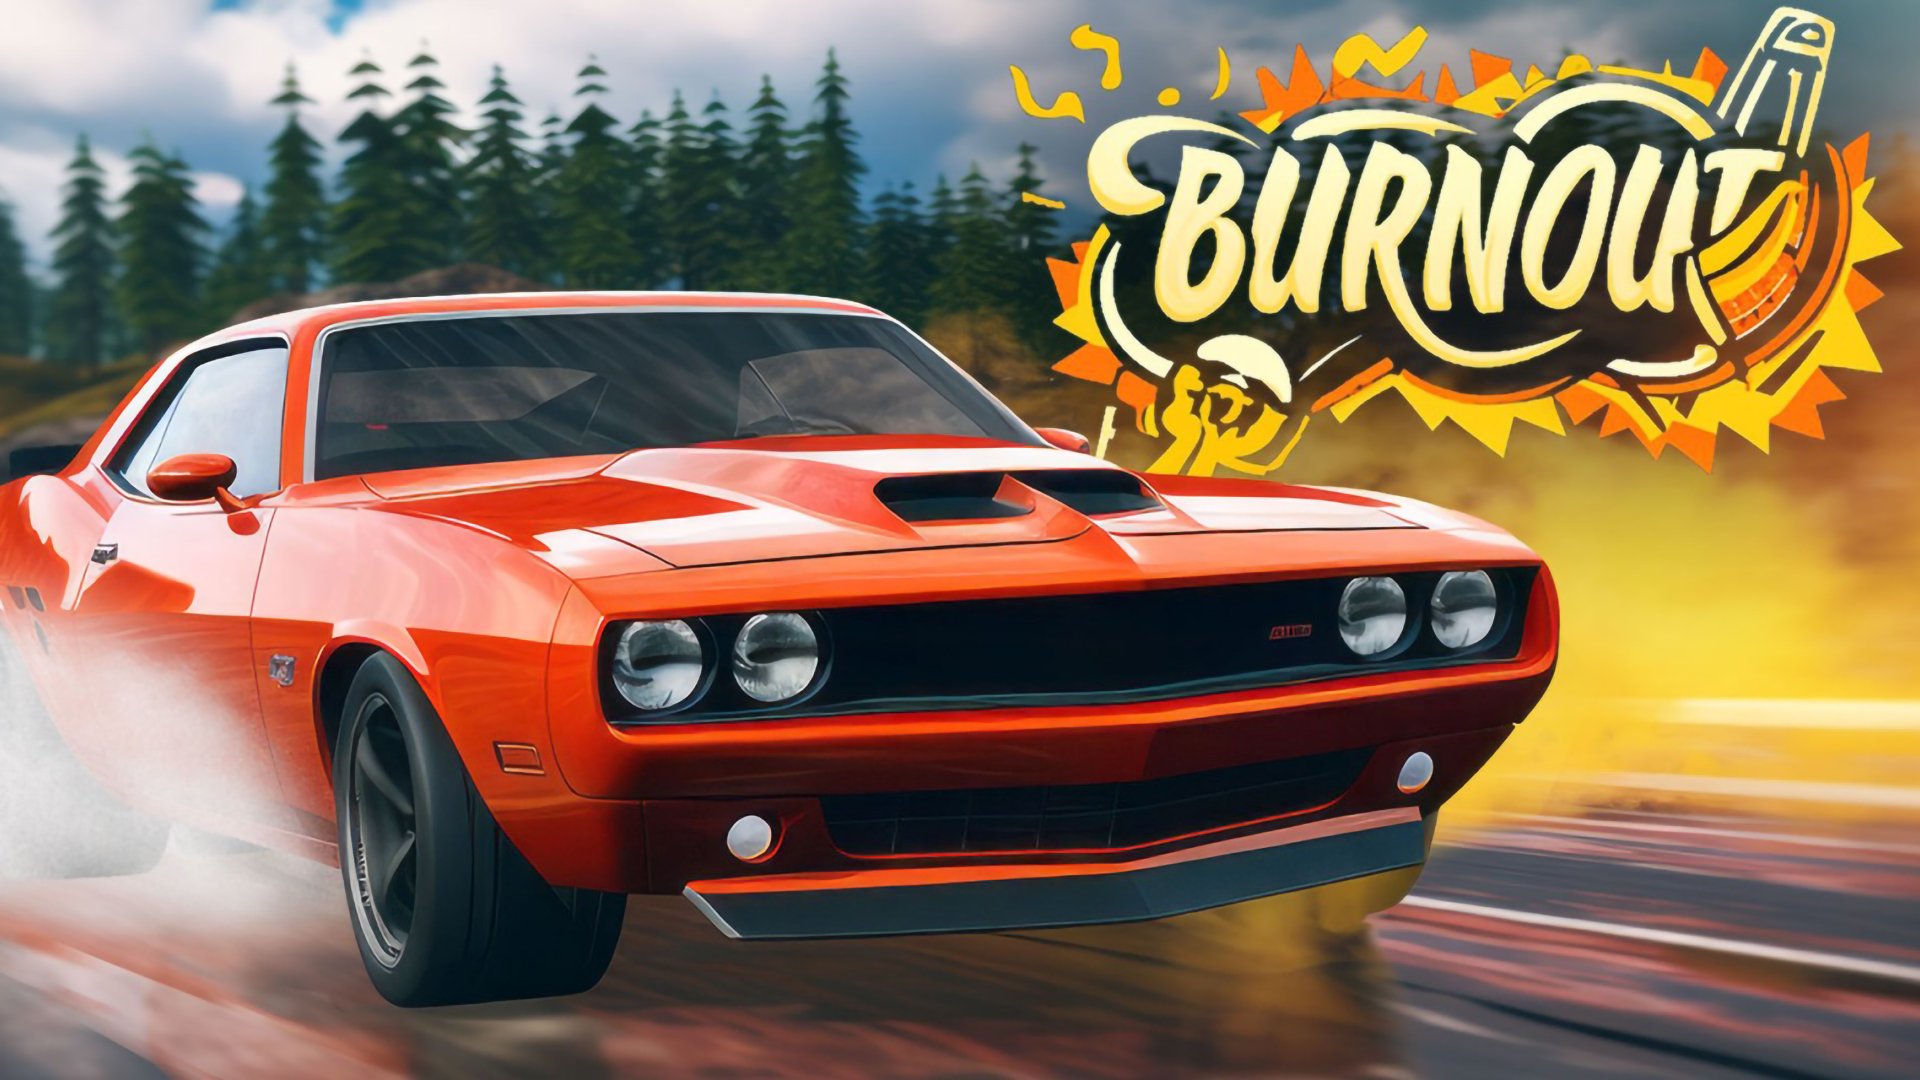 New \'Burnout\' game on Switch eShop has nothing to do with EA\'s series | VGC